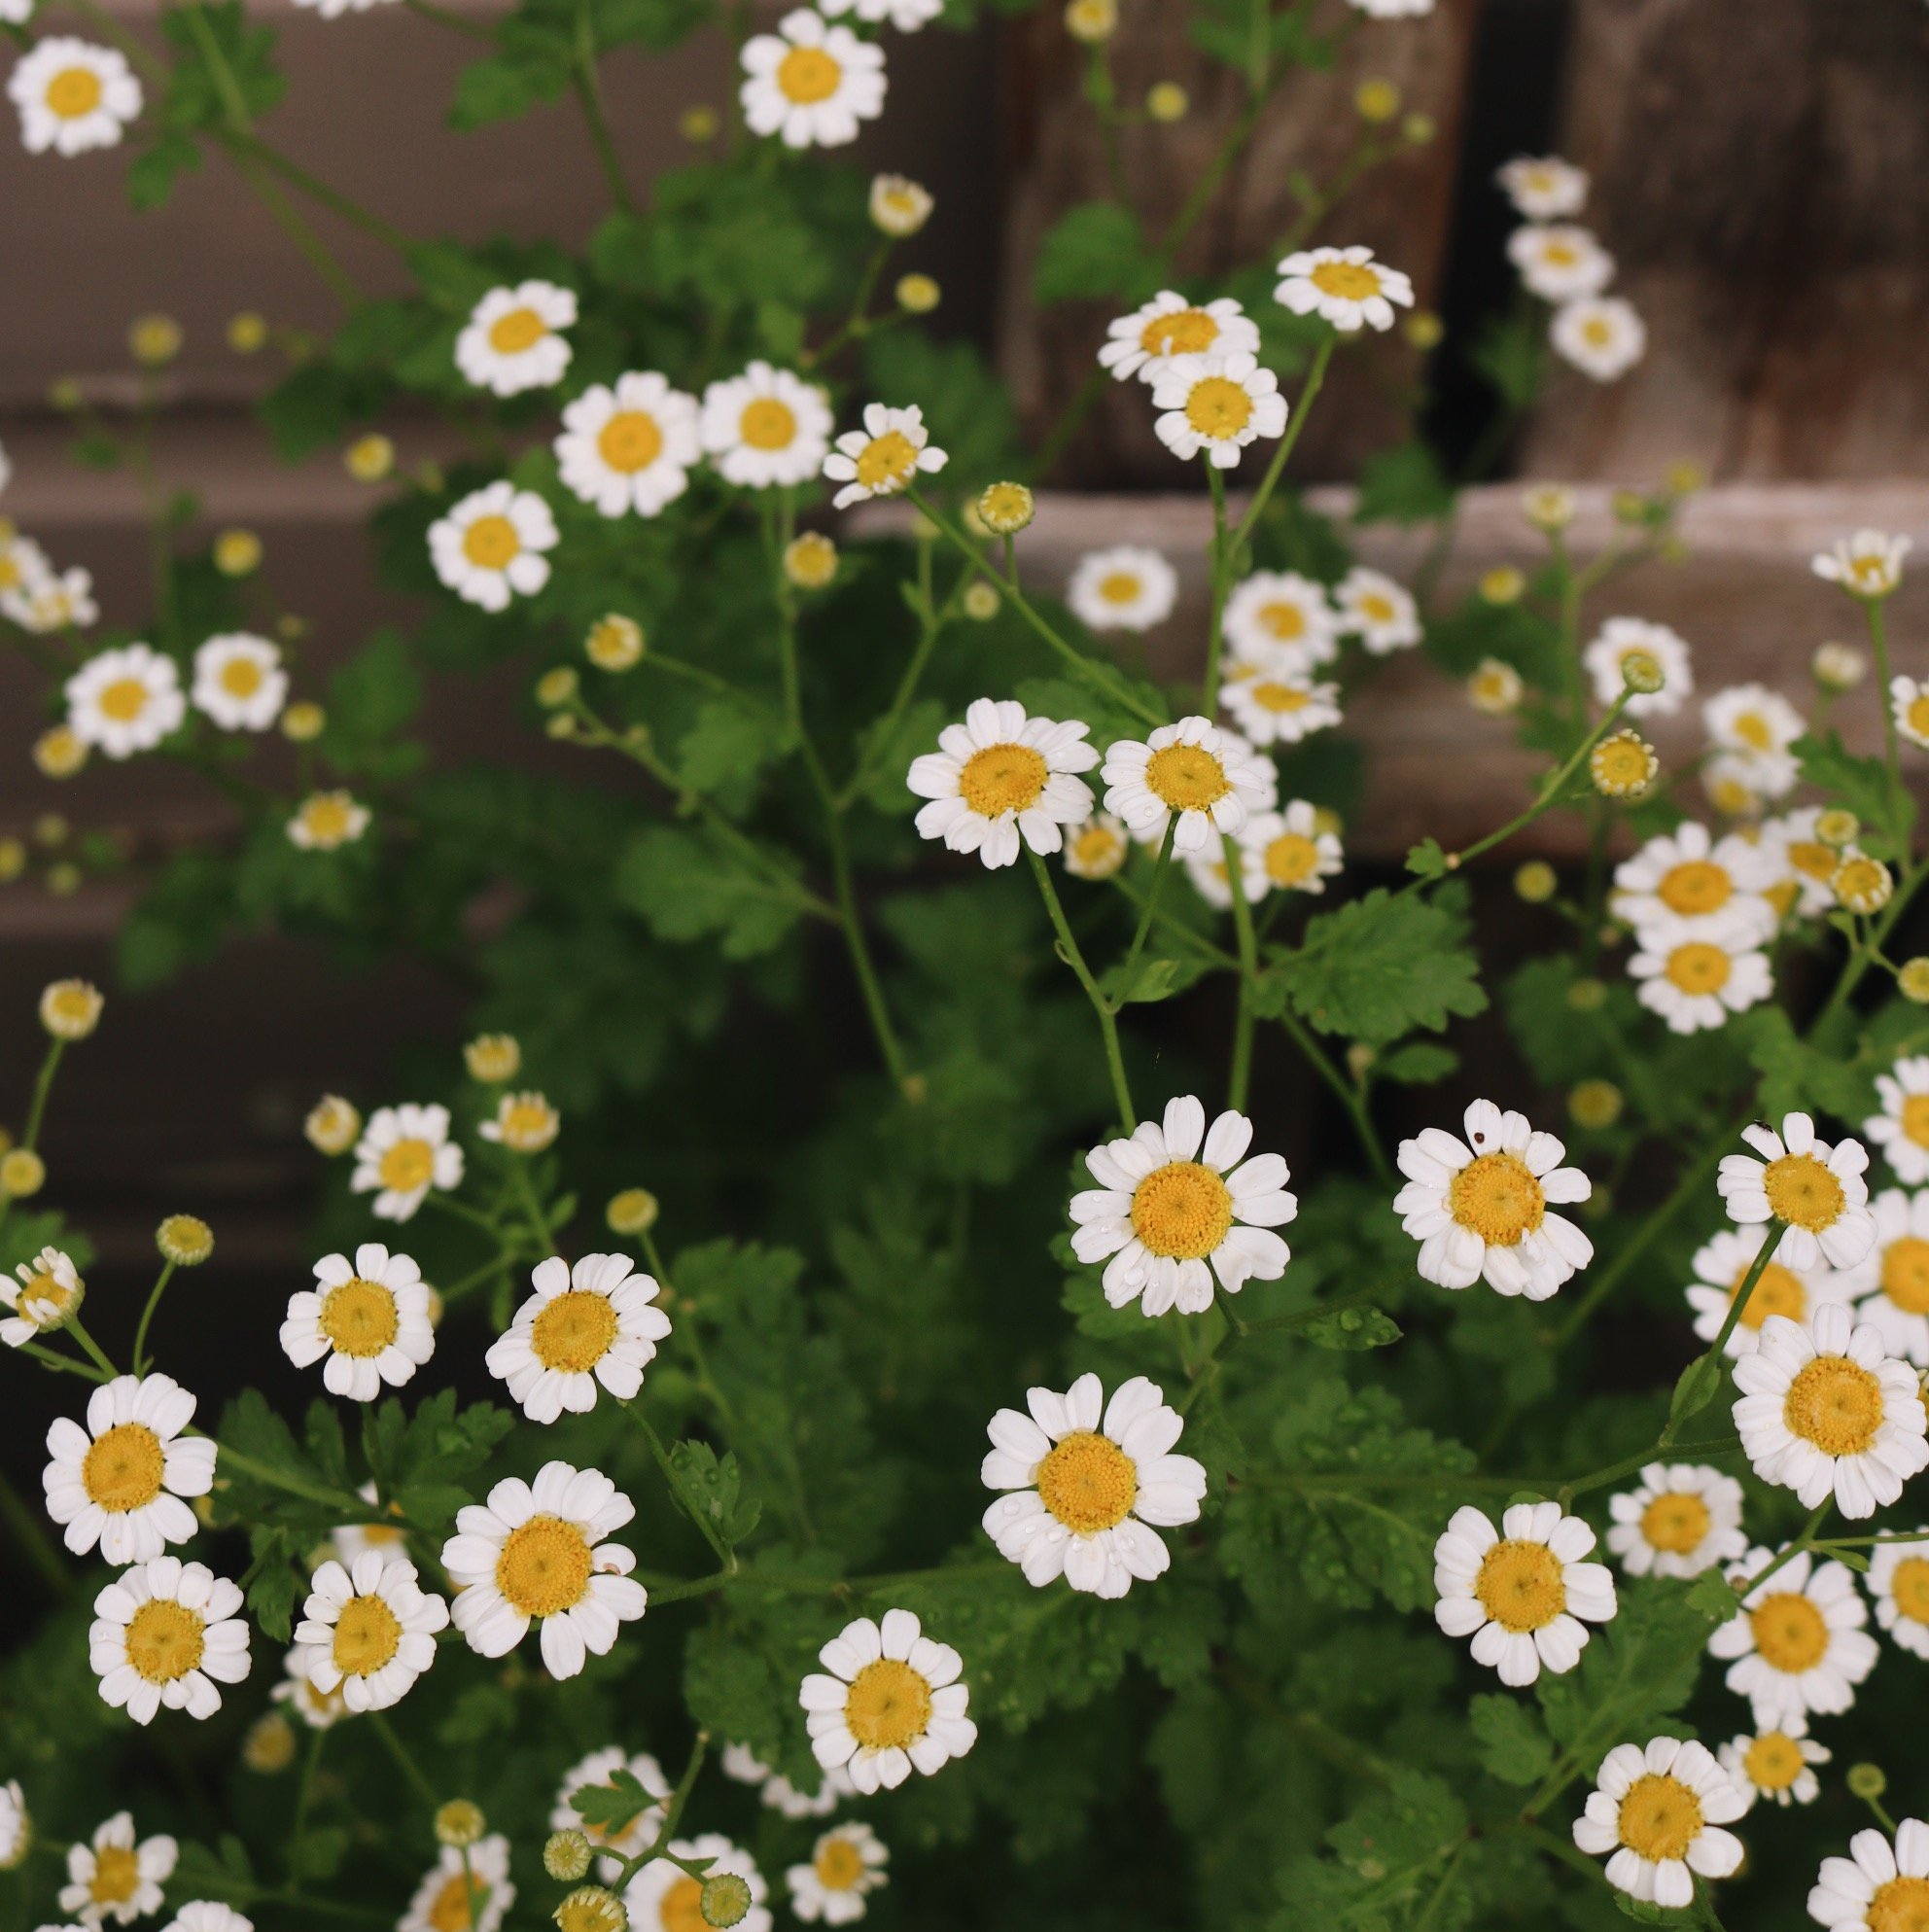 Image of Feverfew, a daisy that blooms all summer